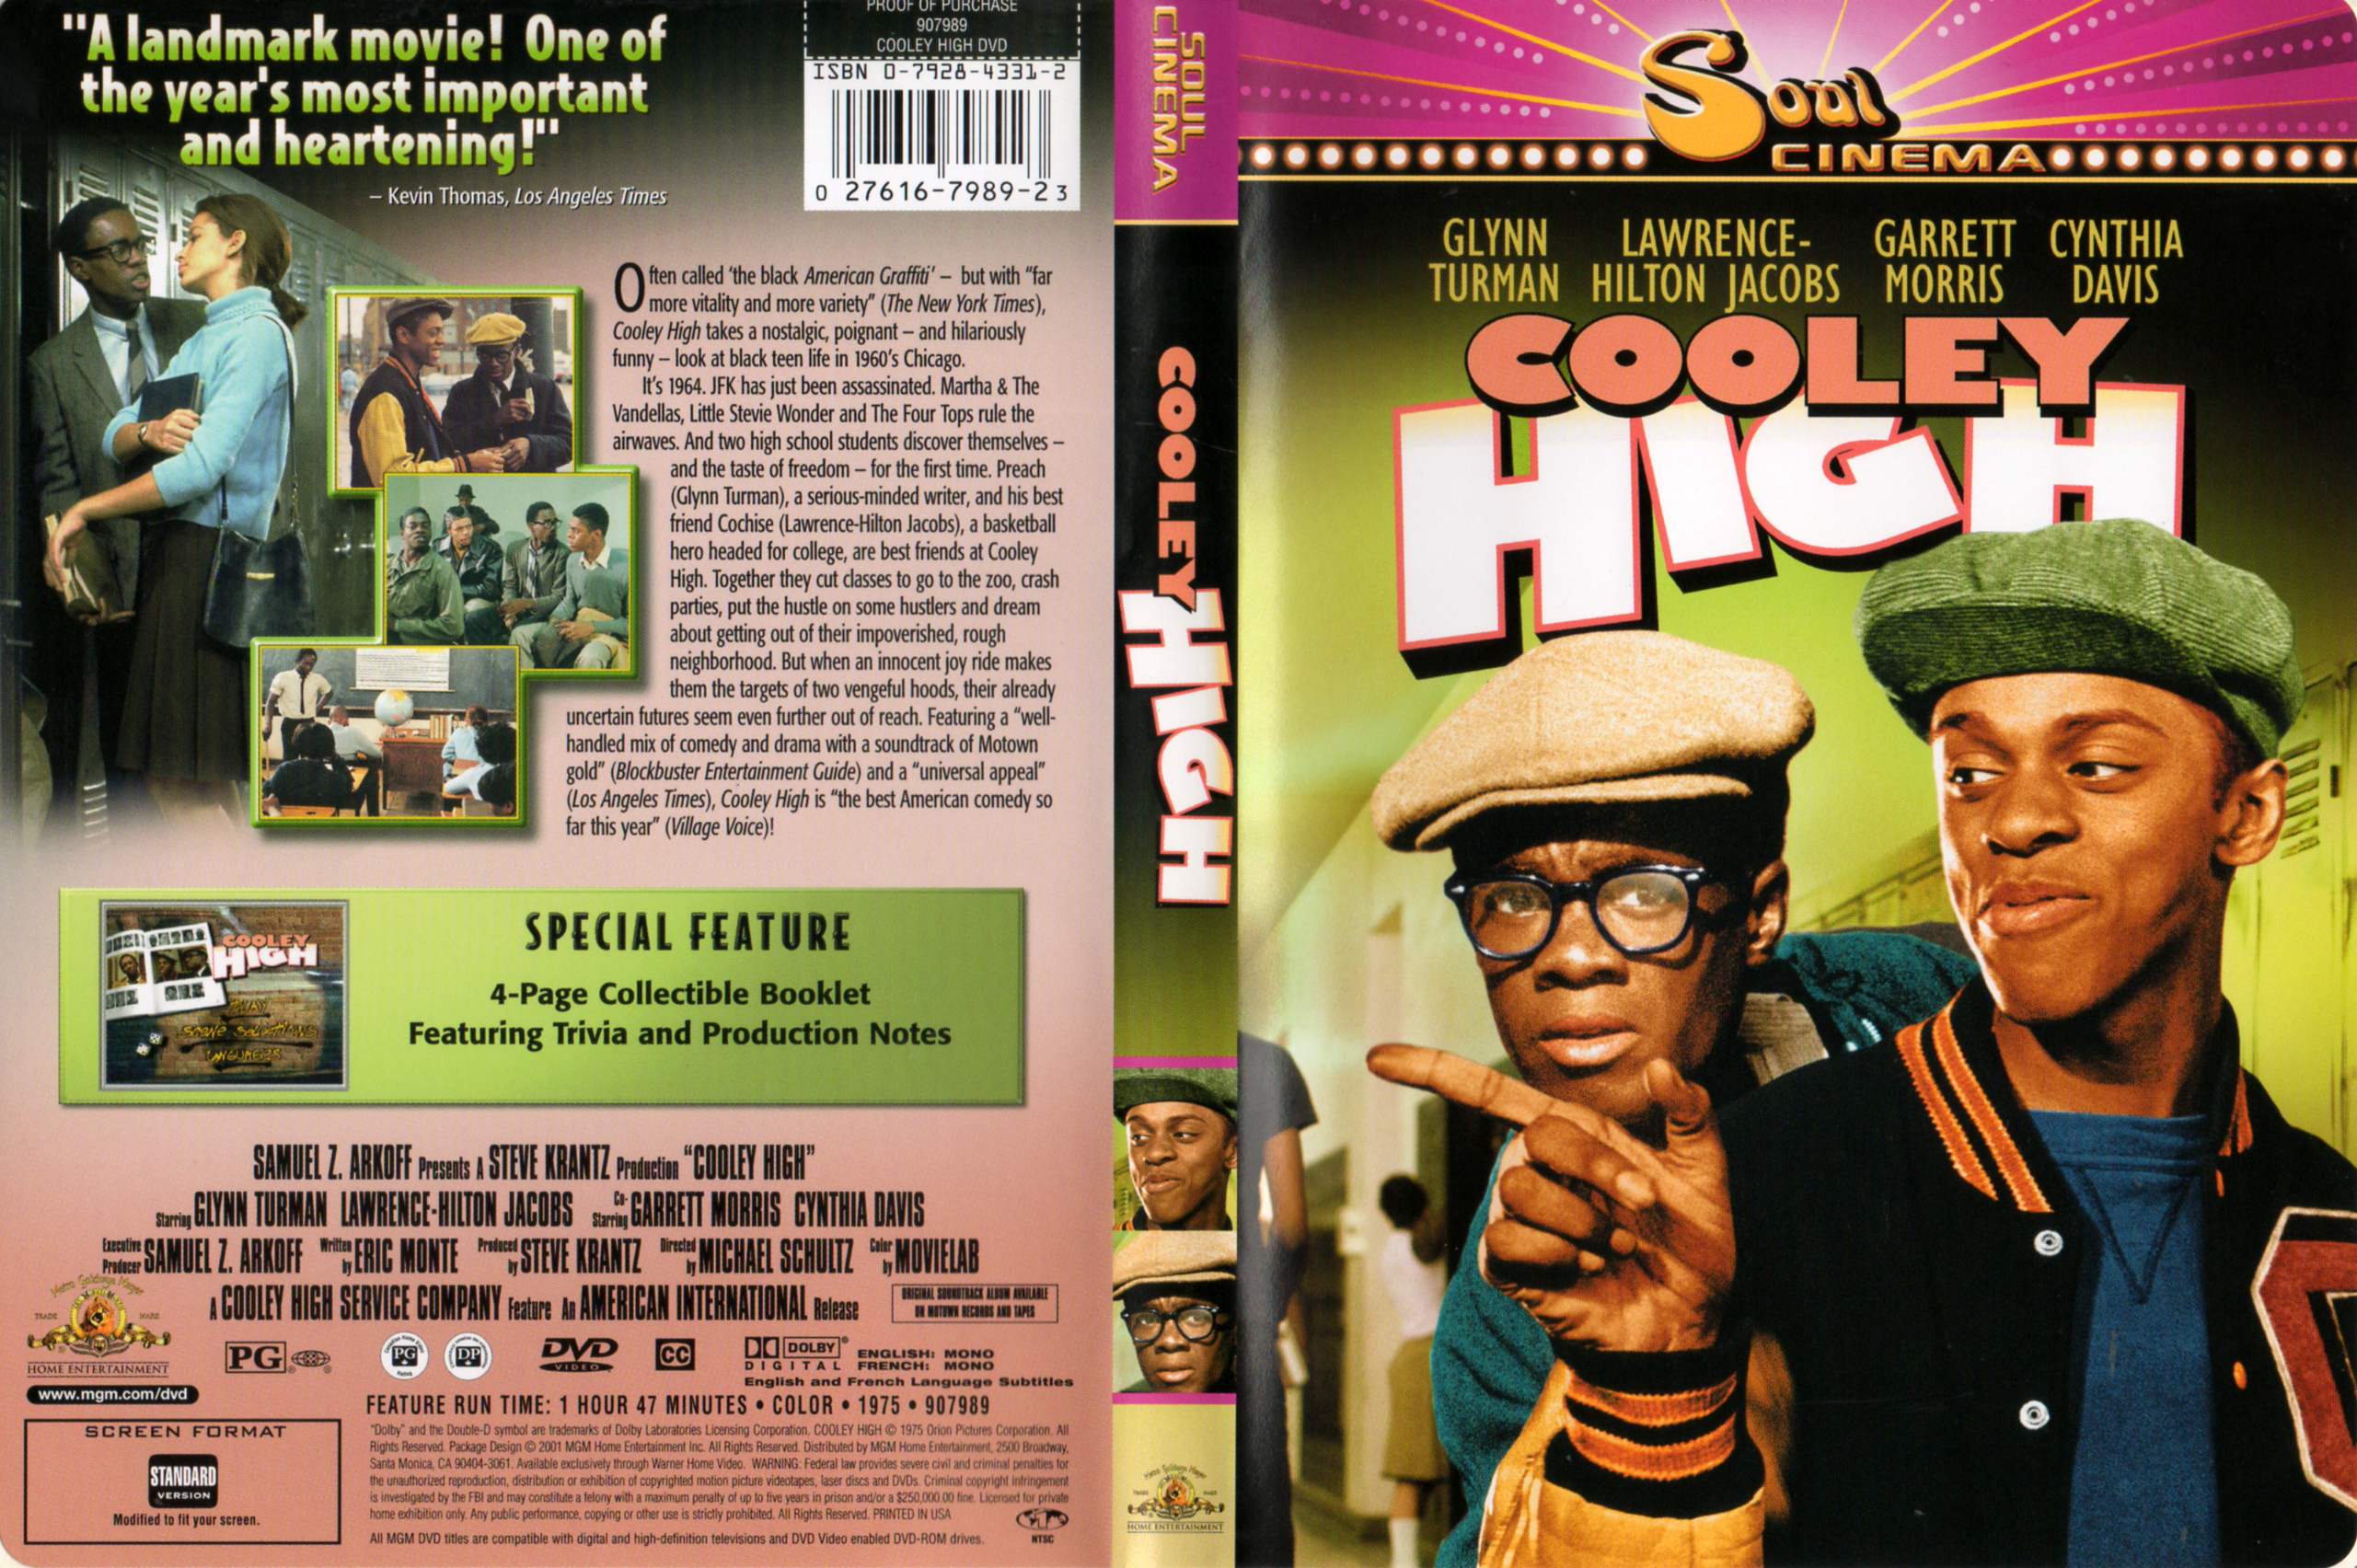 Jaquette DVD Cooley High Zone 1